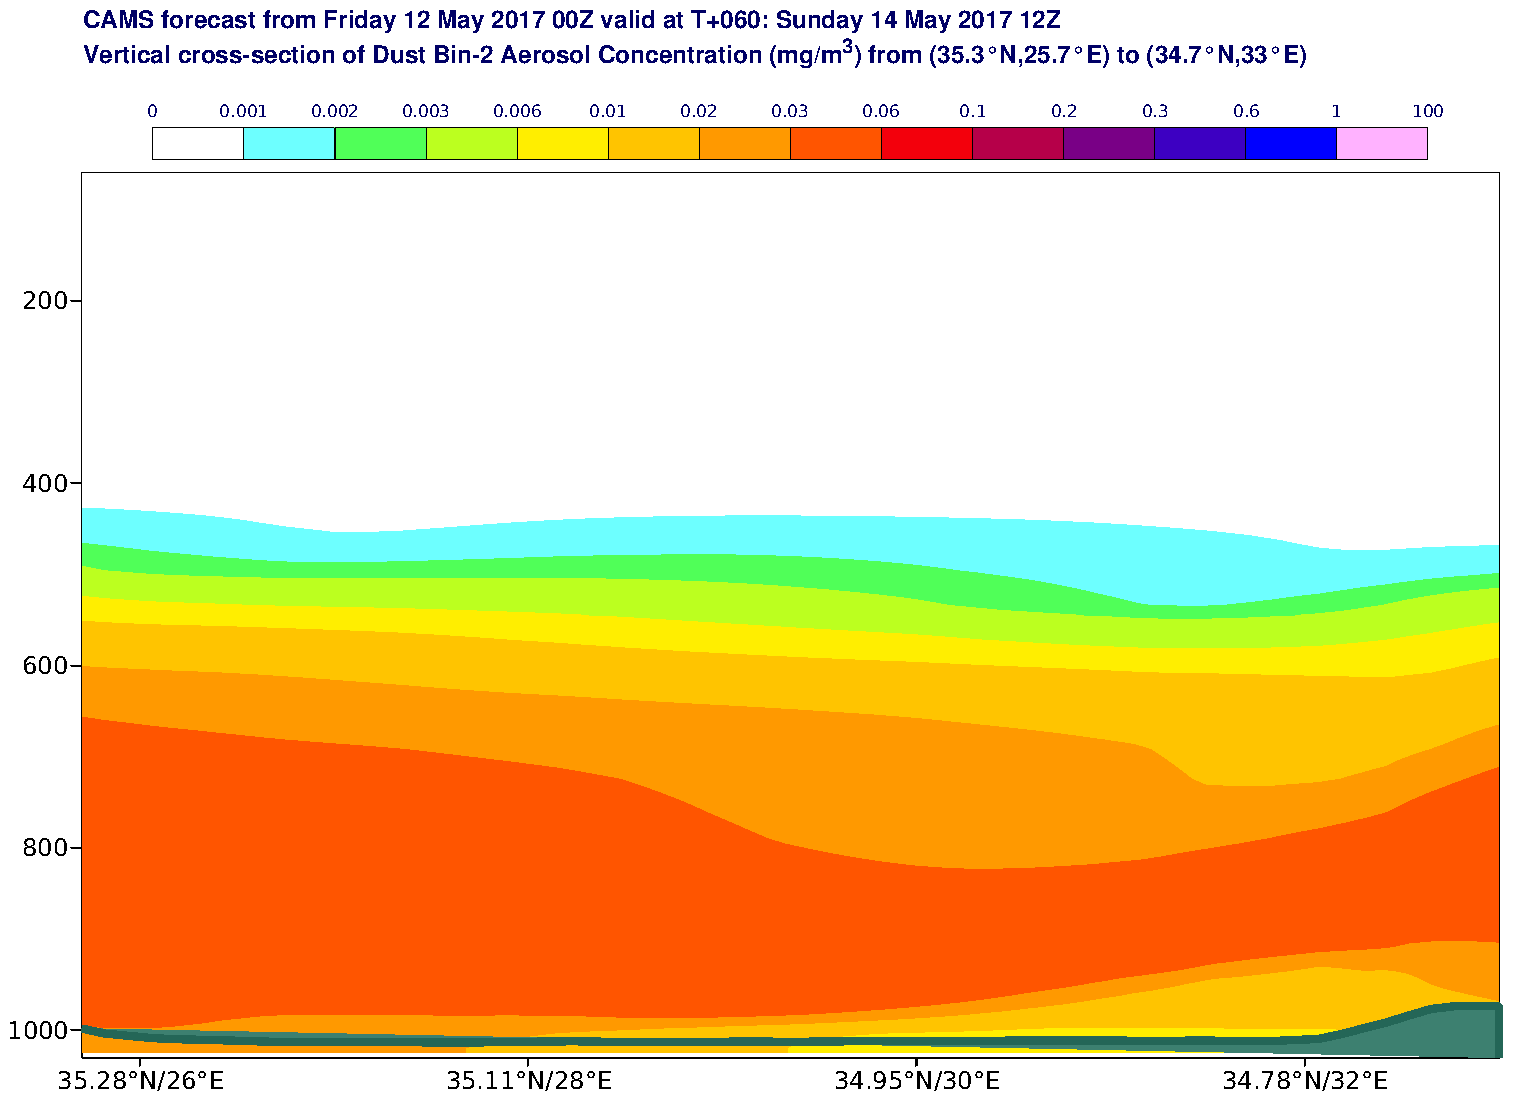 Vertical cross-section of Dust Bin-2 Aerosol Concentration (mg/m3) valid at T60 - 2017-05-14 12:00